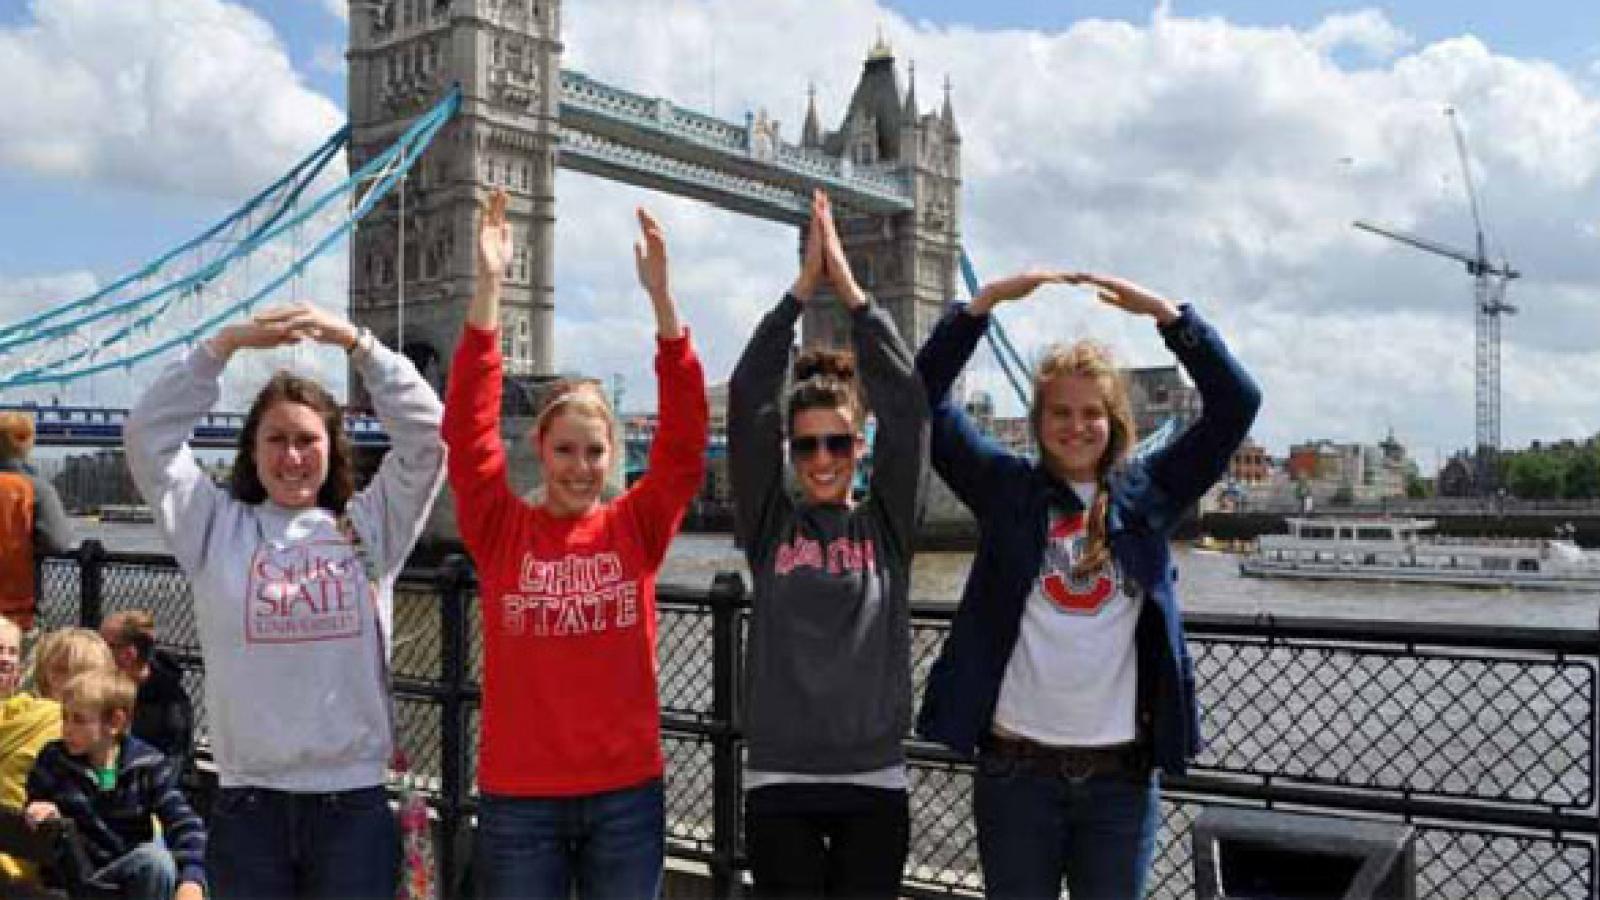 Jeanna Kruse with friends in front of the London Bridge.